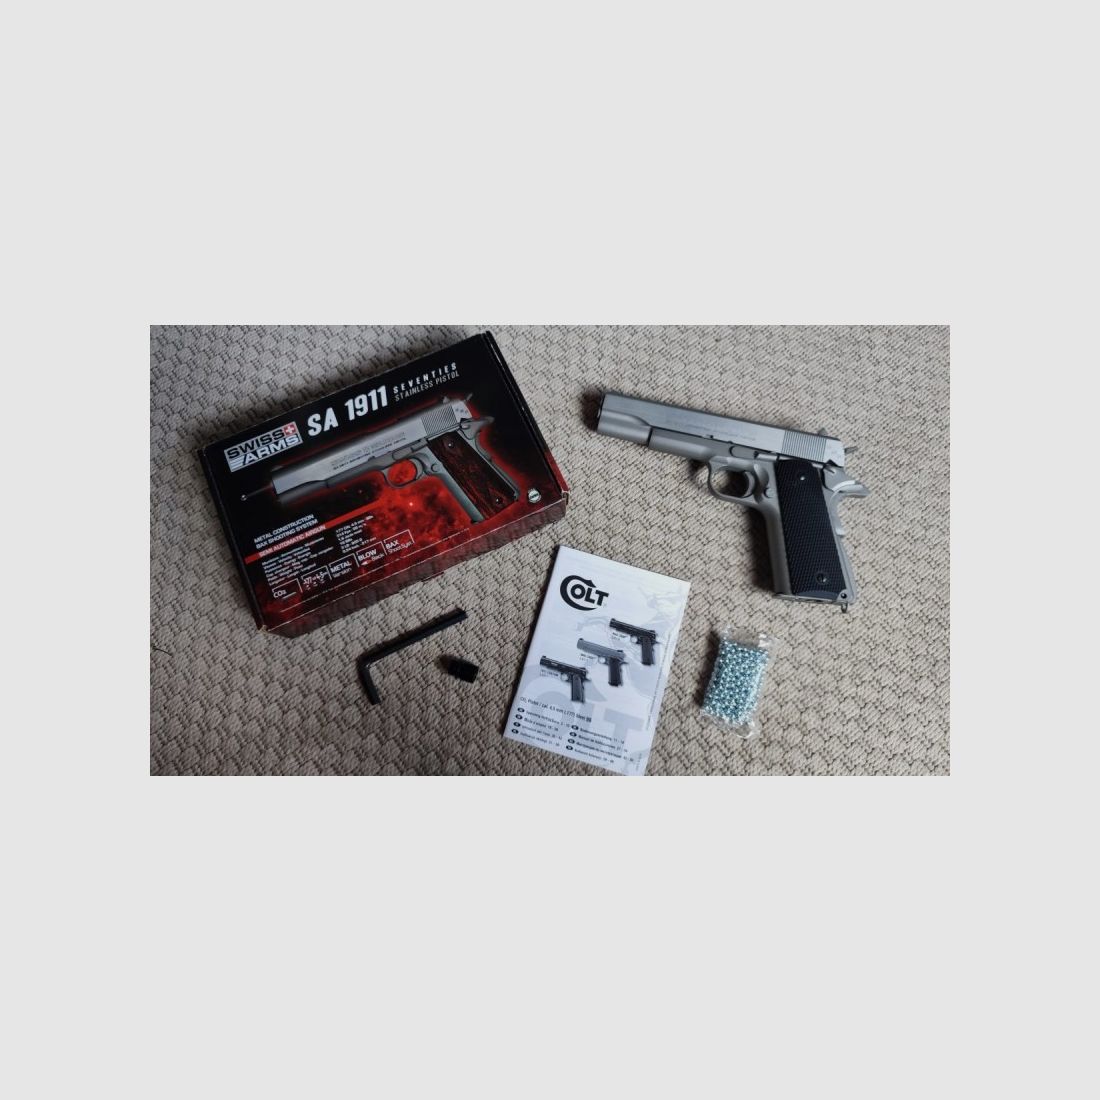 Swiss Arms CO2 Pistole SA 1911 stainless steel Blowback 4,5mm